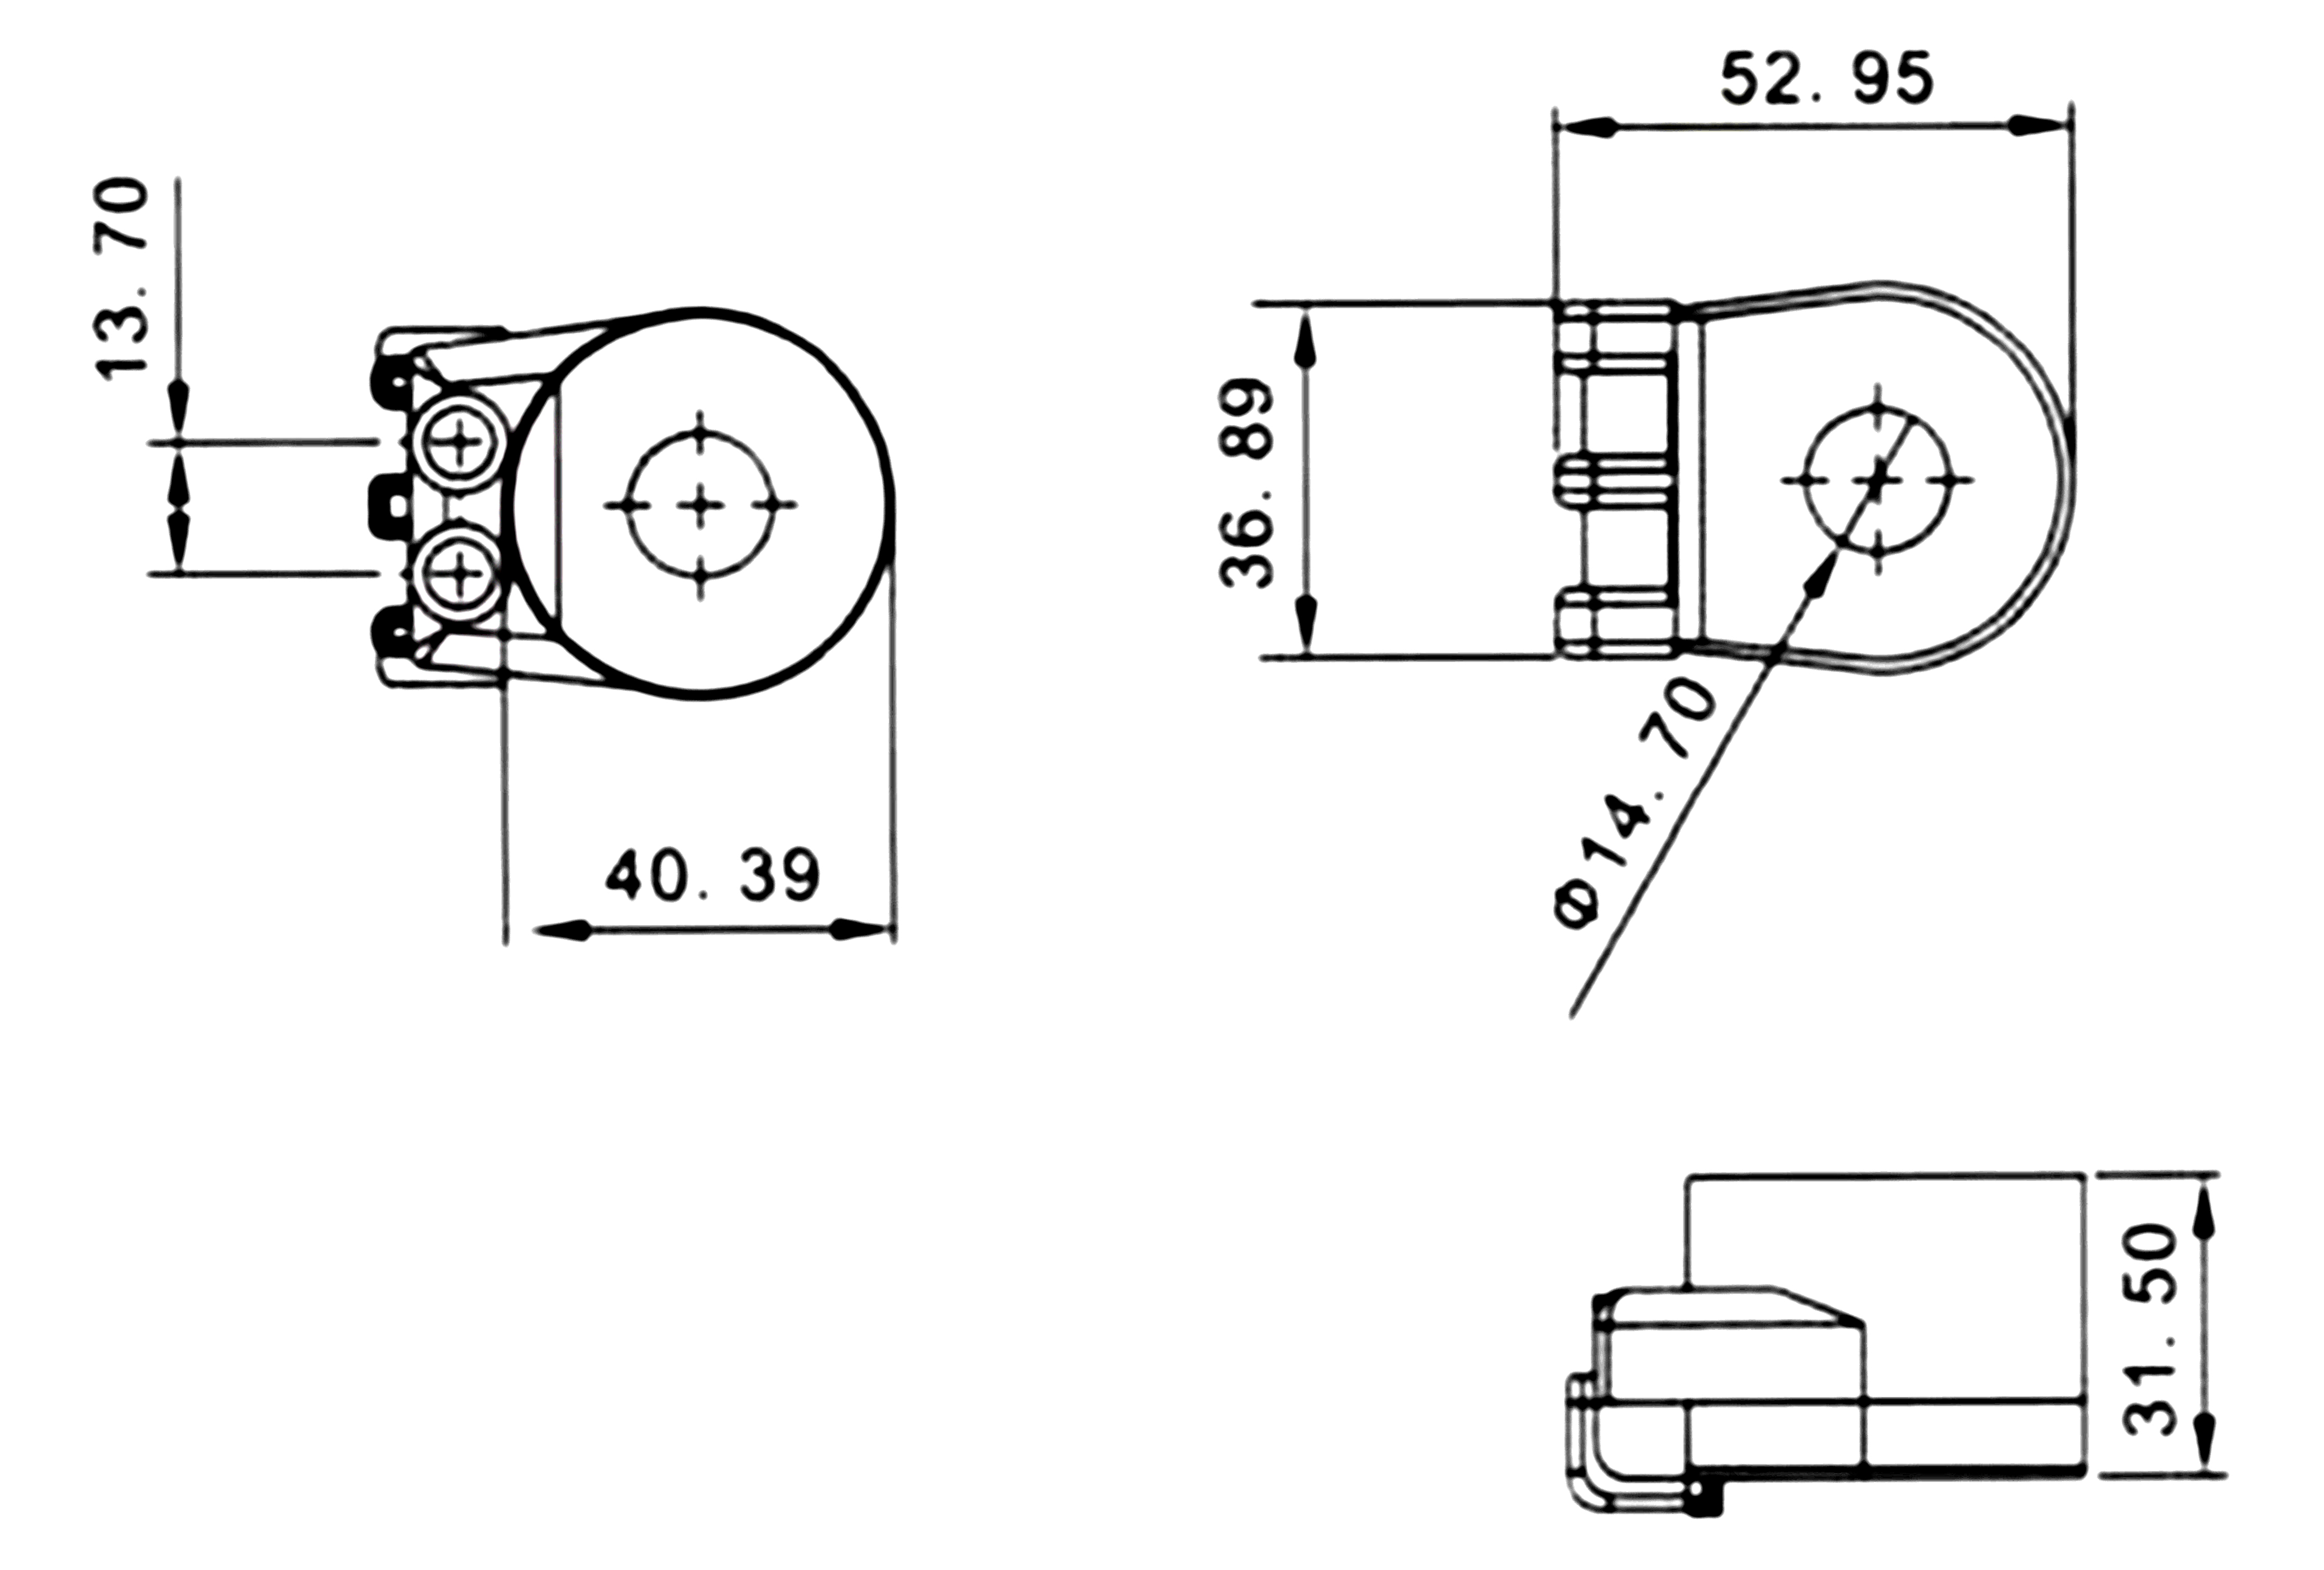 Dimension of BB14831819 Solenoid Coil: